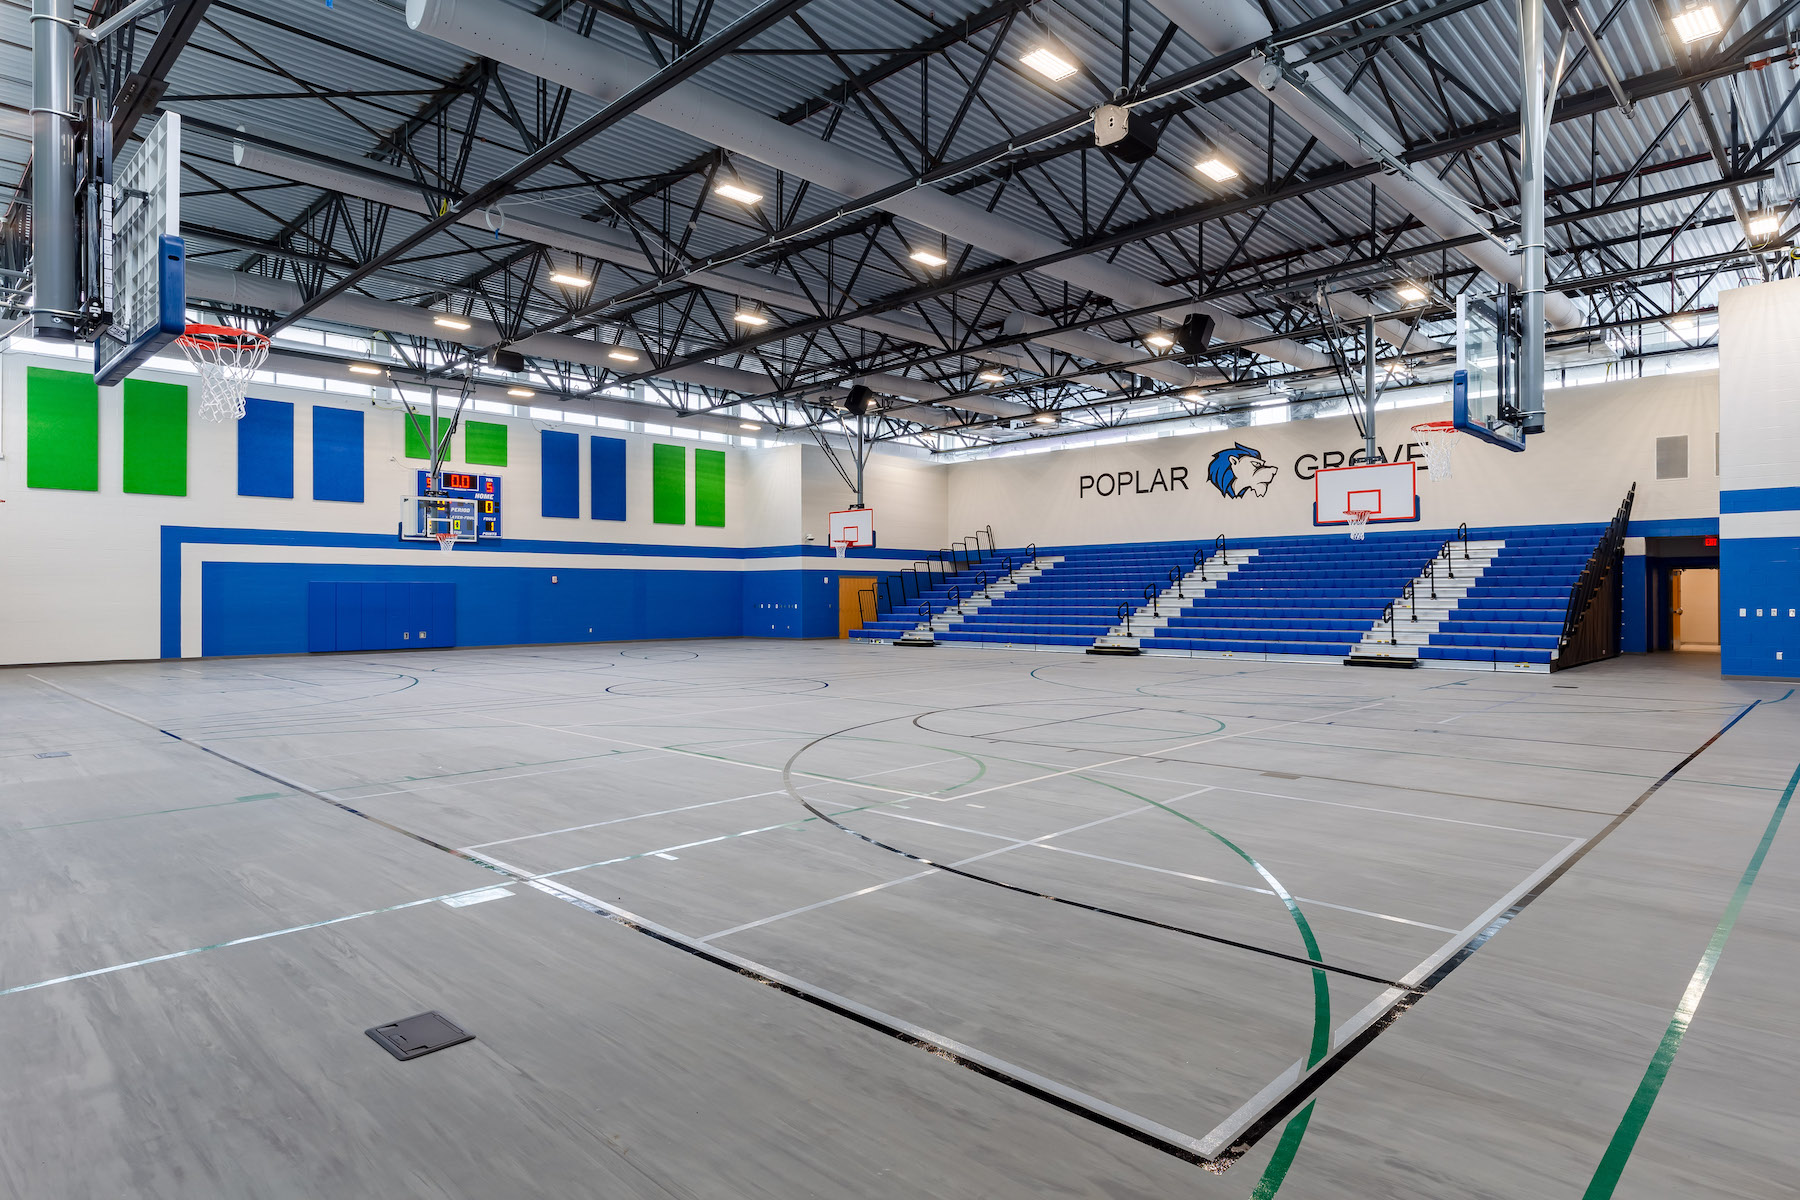 The new gym for the Poplar Grove Elementary School